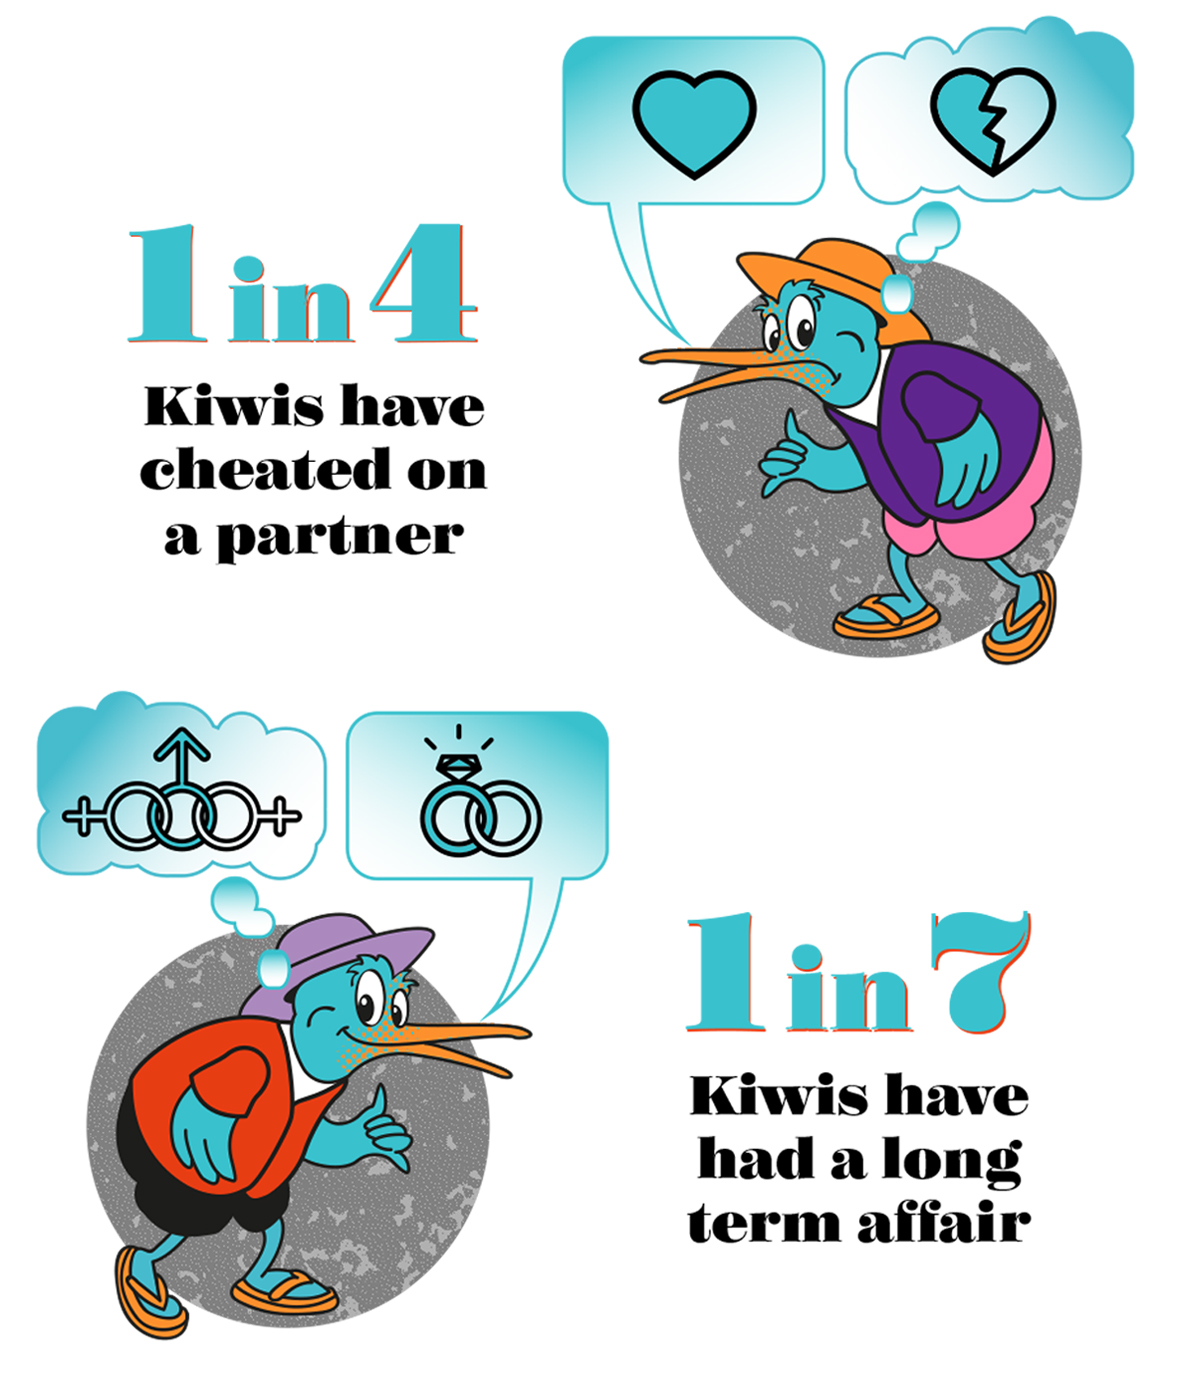 New Zealand cheating habits and sex life obstacles infographic 4